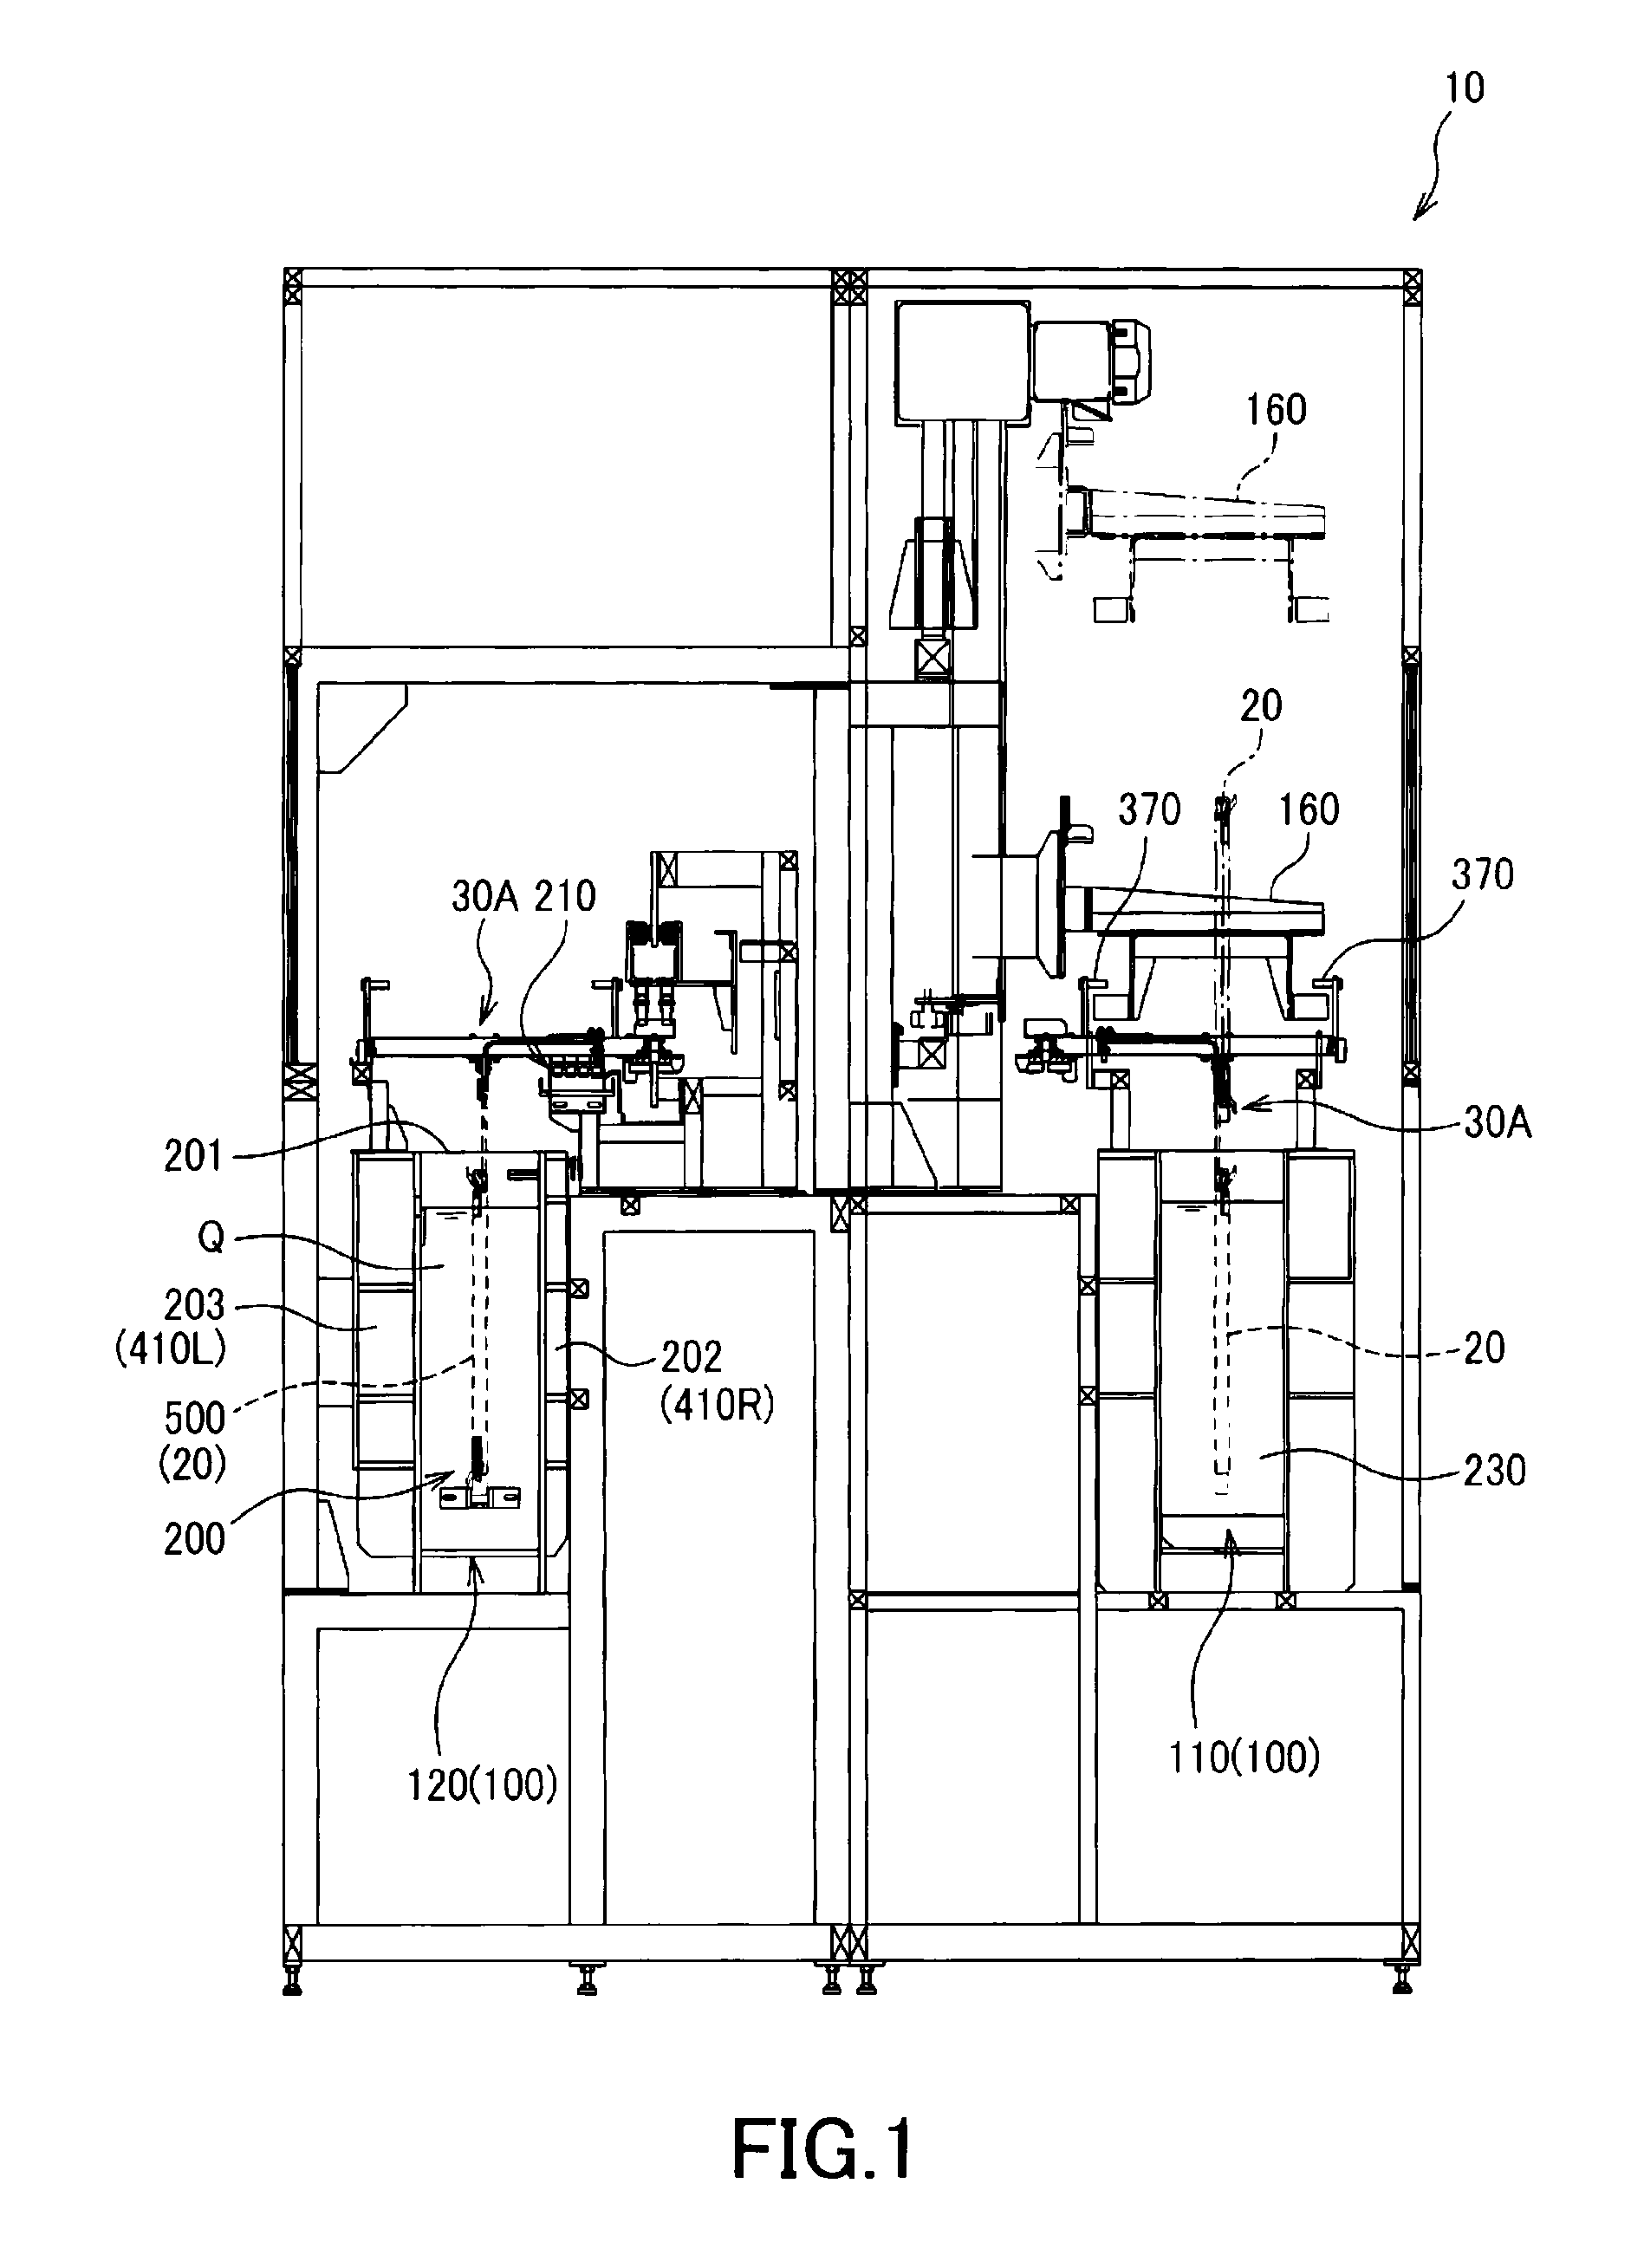 Surface treatment system and workpiece-holding jig